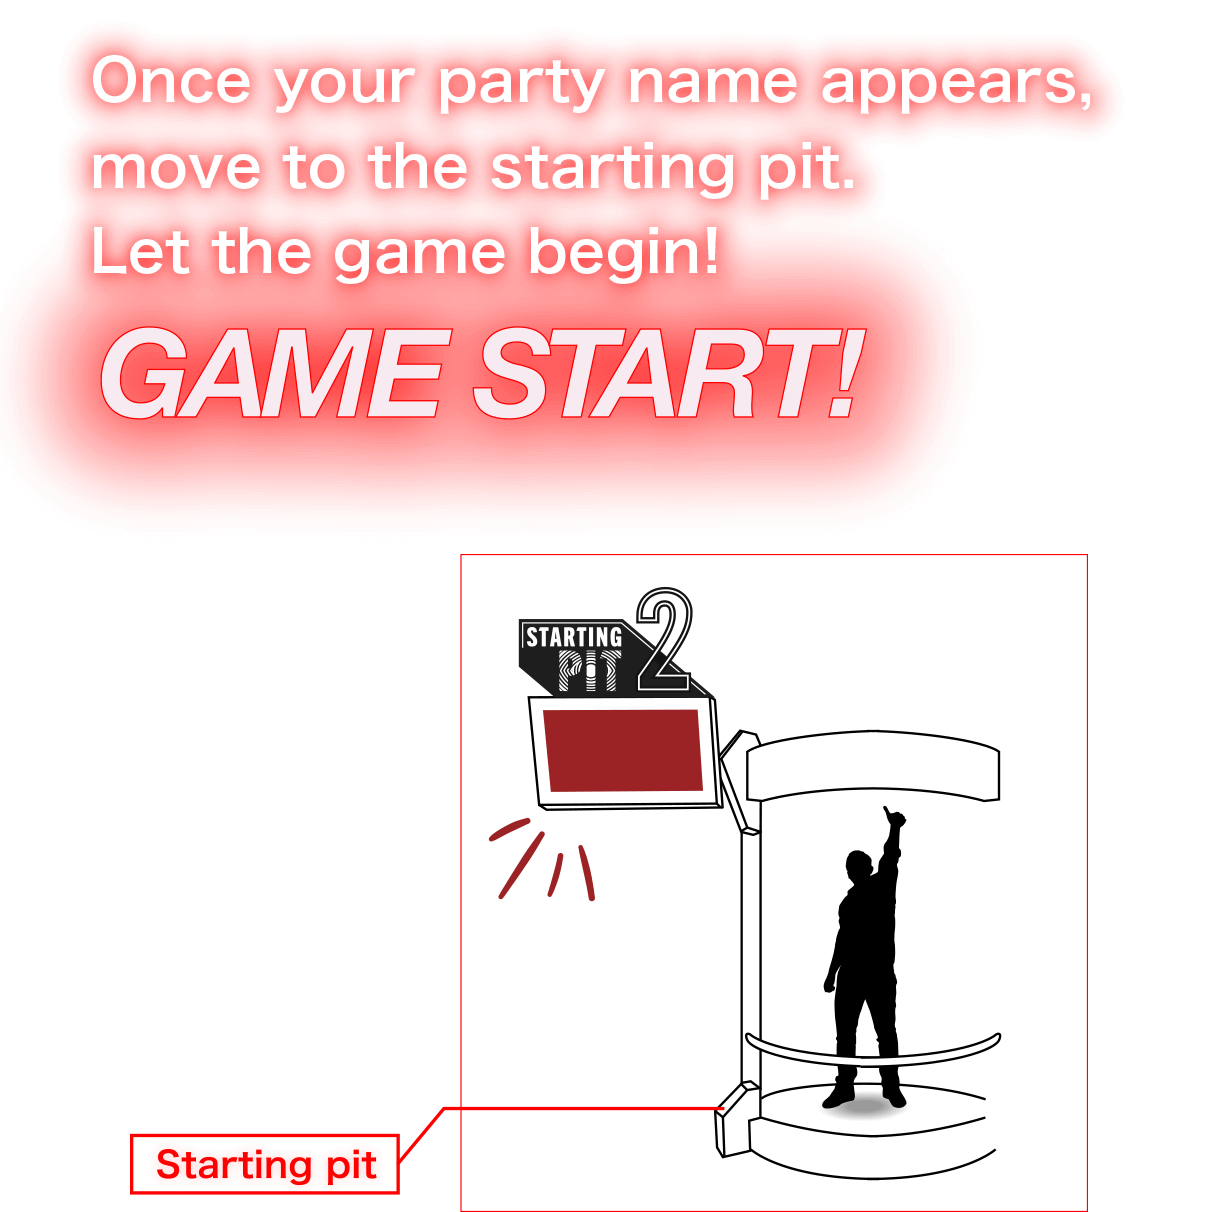 Once your party name appears, move to the starting pit. Let the game begin! GAME START!